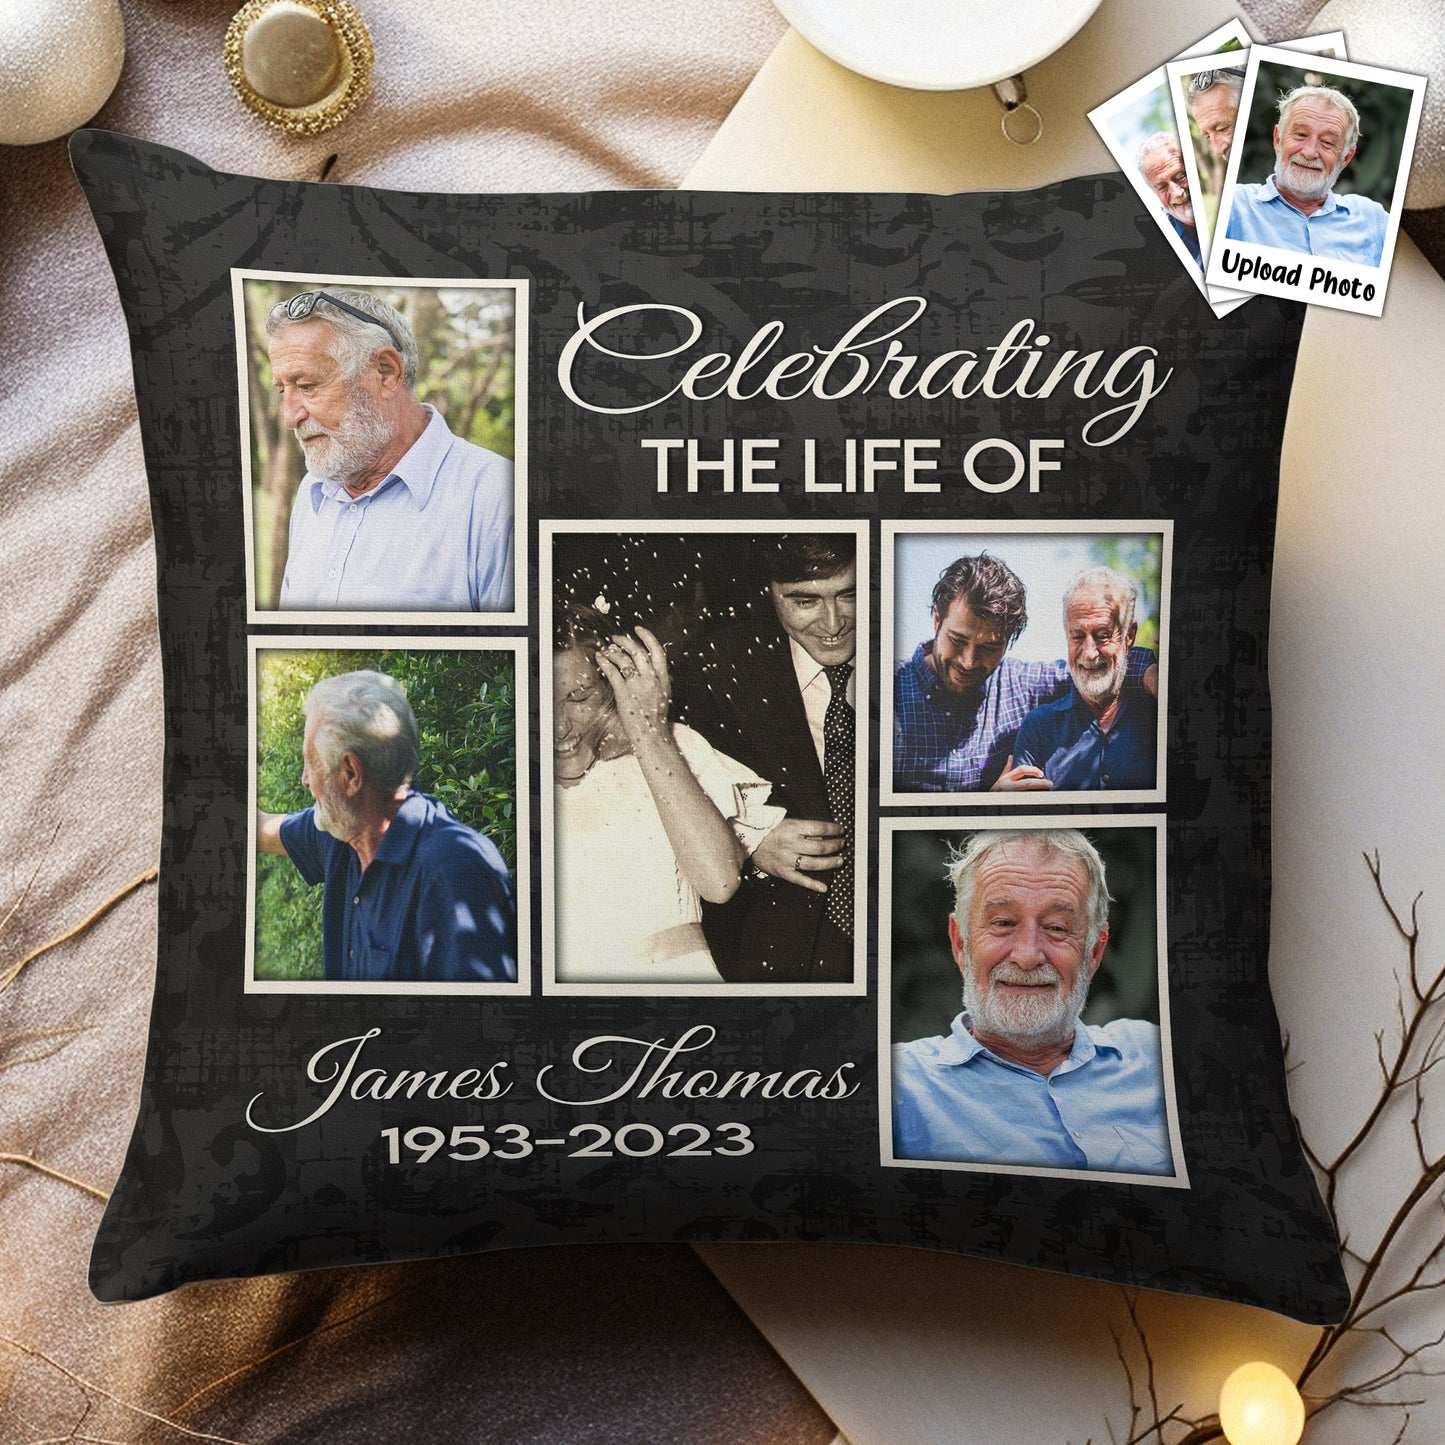 Celebrate A Life - Personalized Photo Pillow